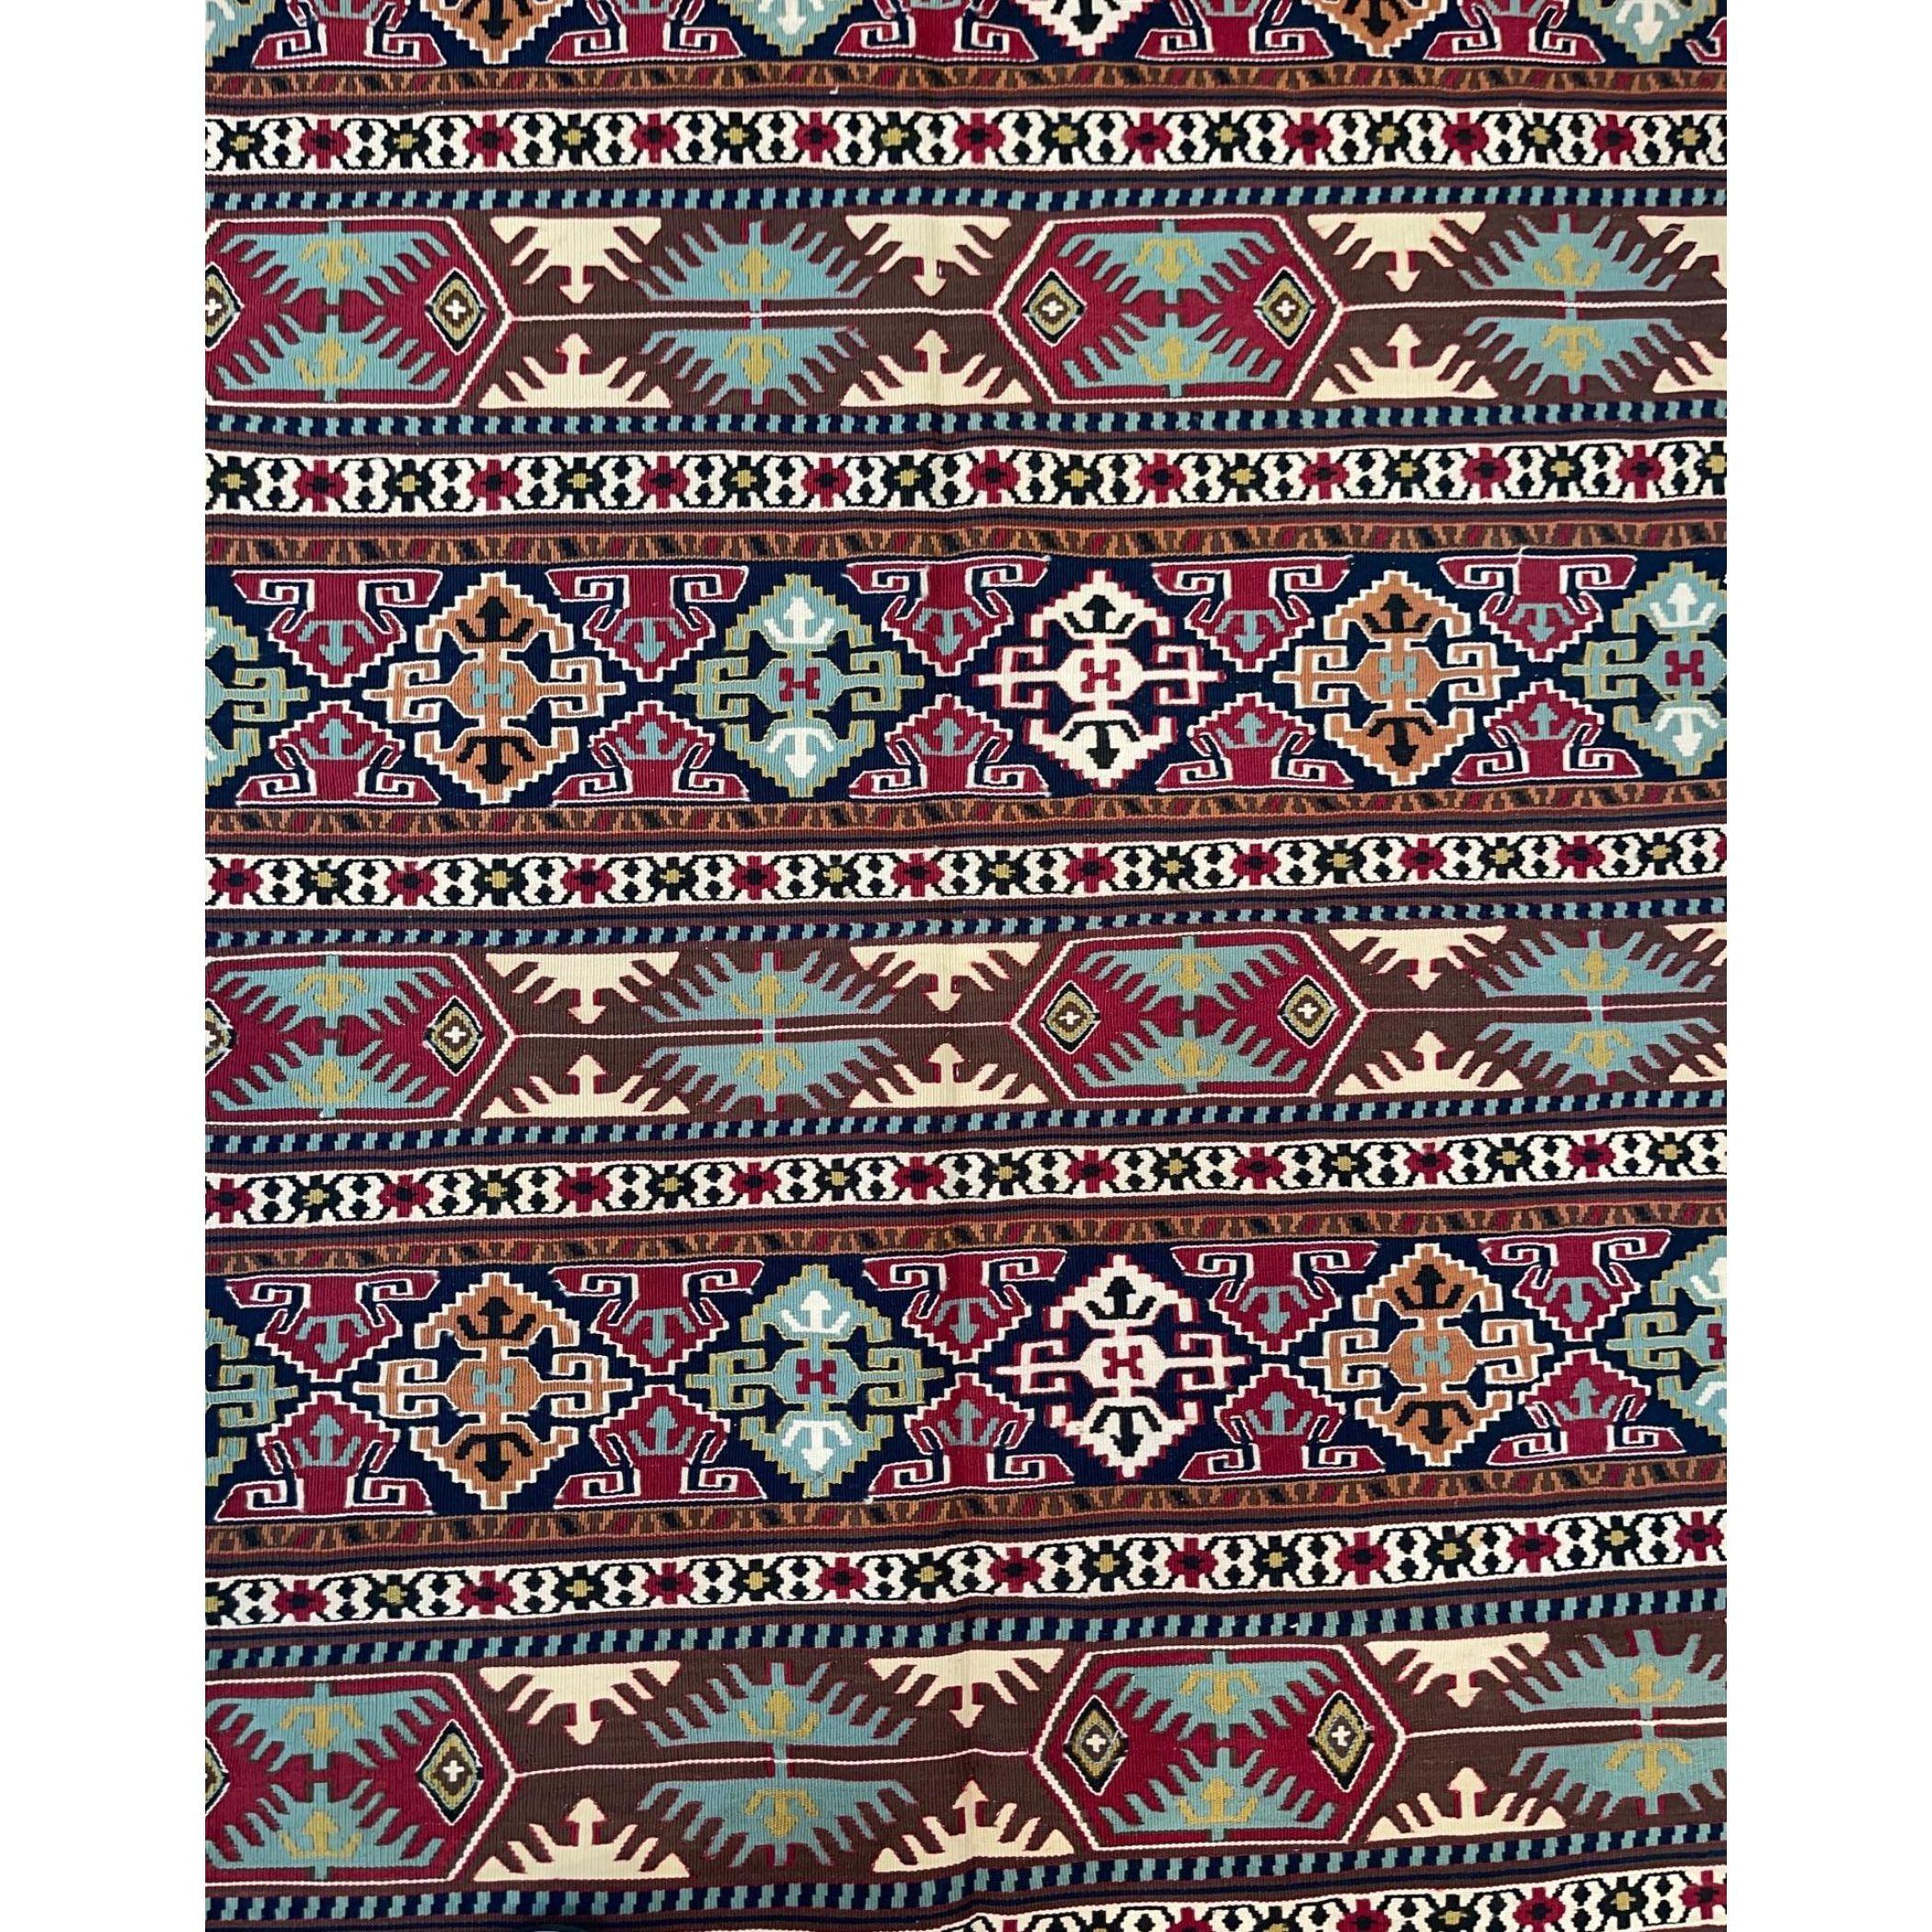 Antique rugs that are called “Kilim rugs”, primarily refer to a type of flat weave rug that was produced without knotted pile. Because these antique rugs are found across the globe, each region has a different pronunciation and spelling of the name